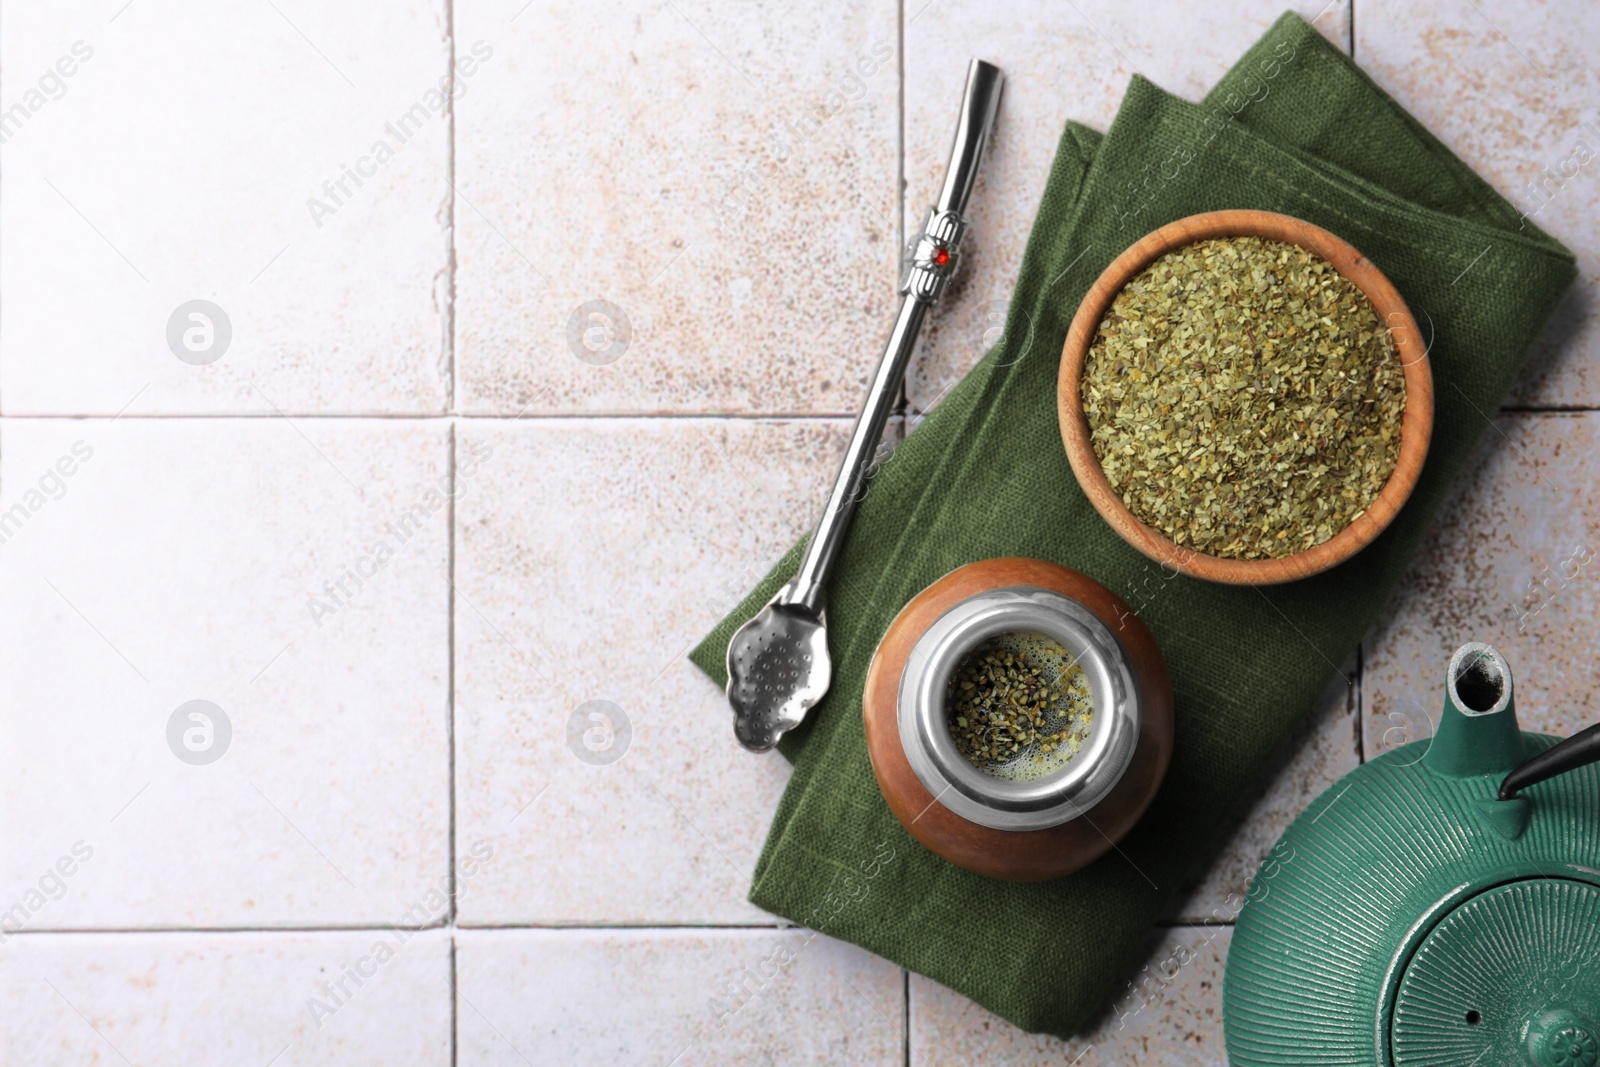 Photo of Calabash, bombilla, bowl of mate tea leaves and teapot on tiled table, flat lay. Space for text